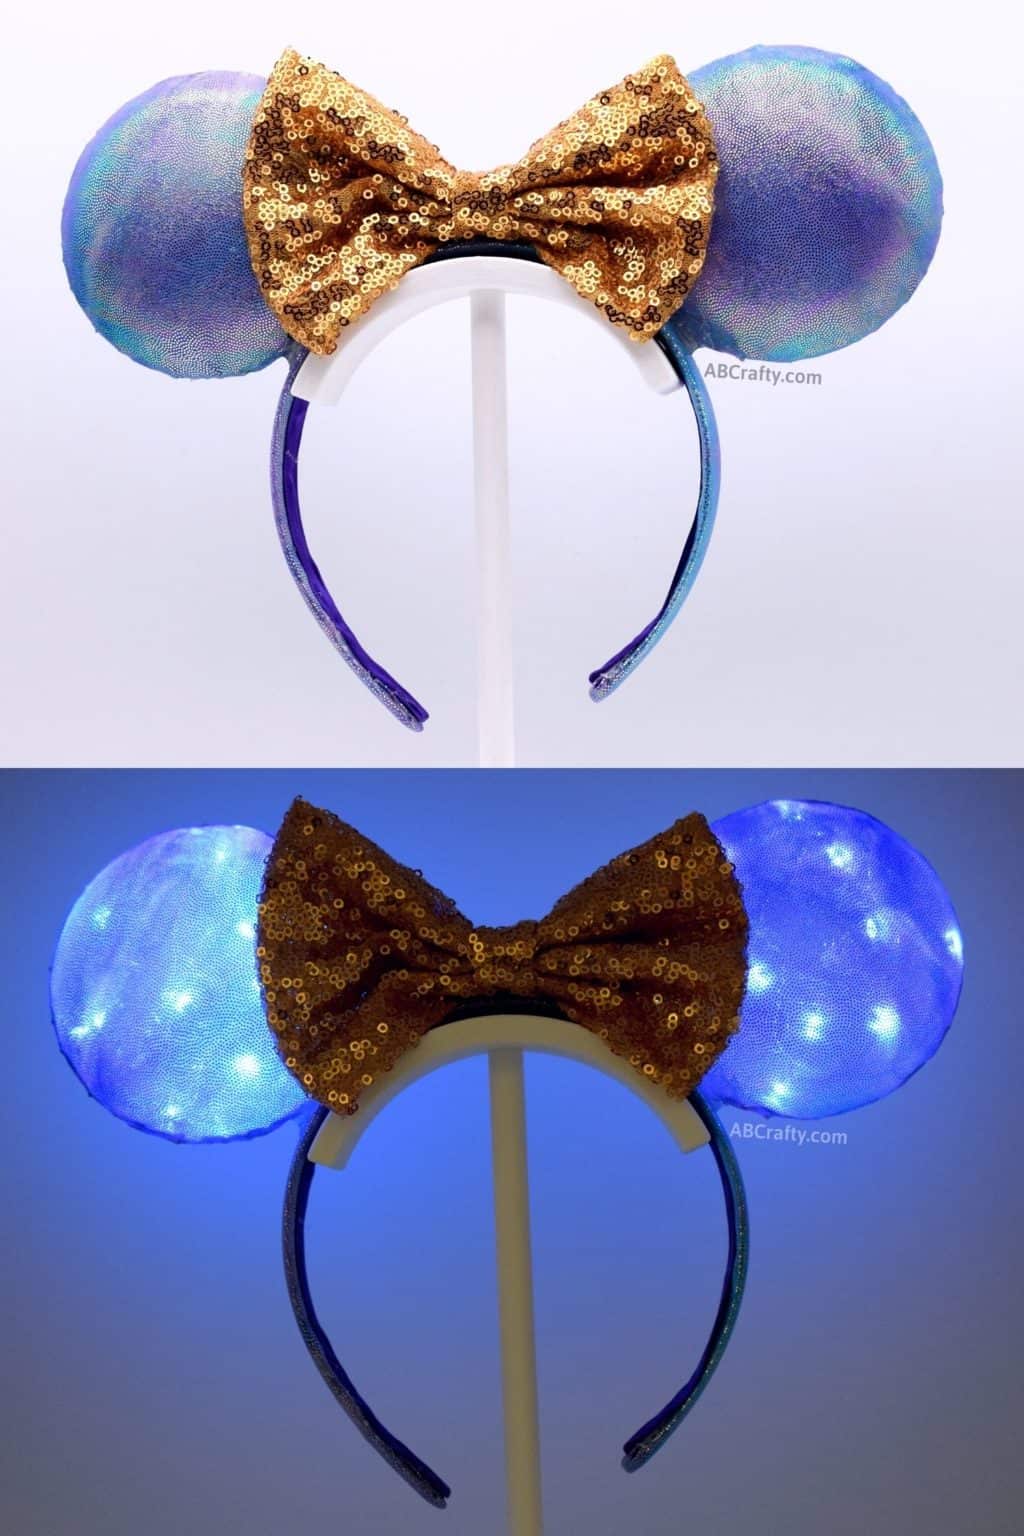 diy purple and blue iridescent mickey mouse ears both in the light and lit up in the disney world 50th anniversary colors